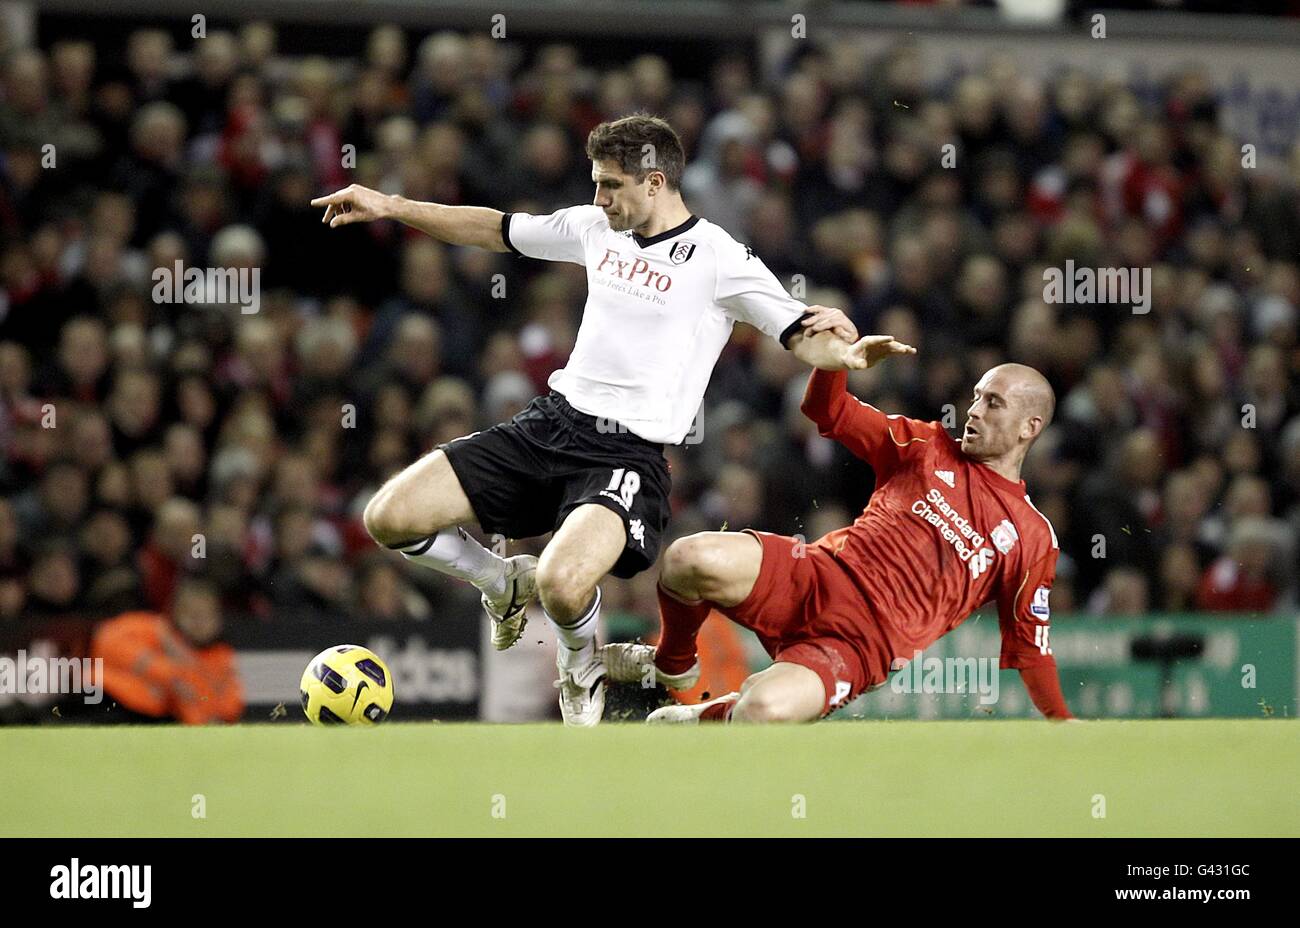 Soccer - Barclays Premier League - Liverpool v Fulham - Anfield. Fulham's Aaron Hughes (left) and Liverpool's Raul Meireles (right) Stock Photo